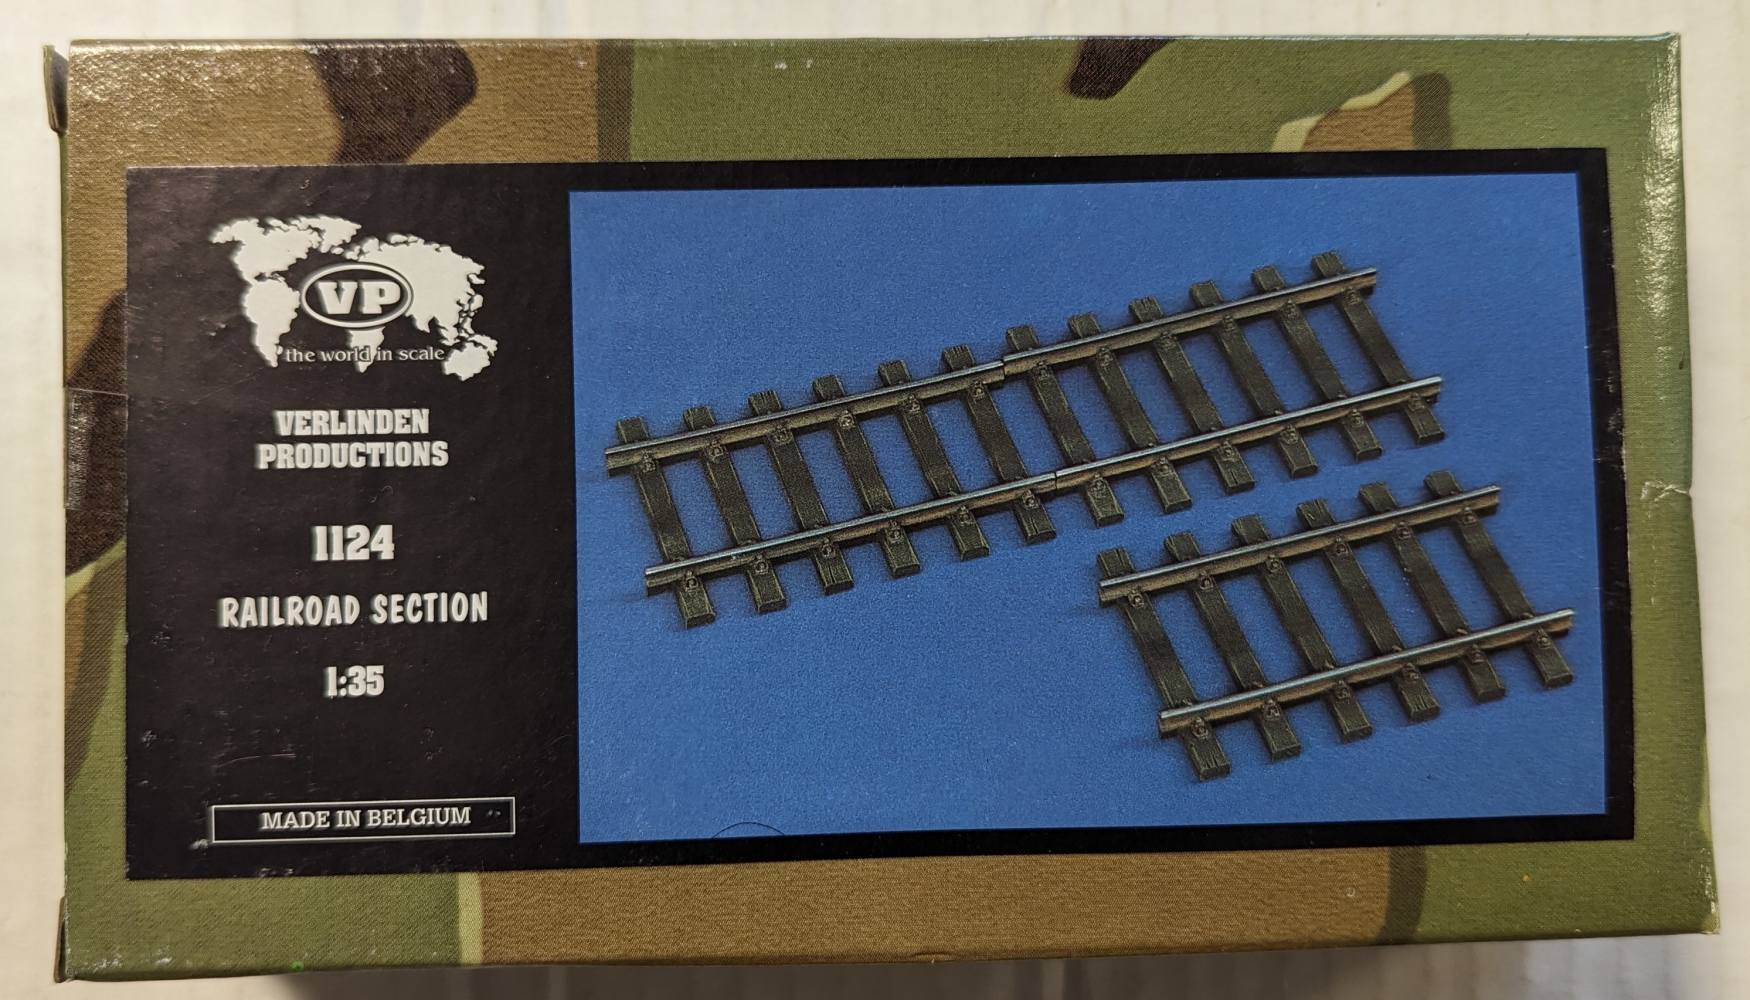 VERLINDEN PRODUCTIONS  1124 RAILROAD SECTION Railway Models Kits